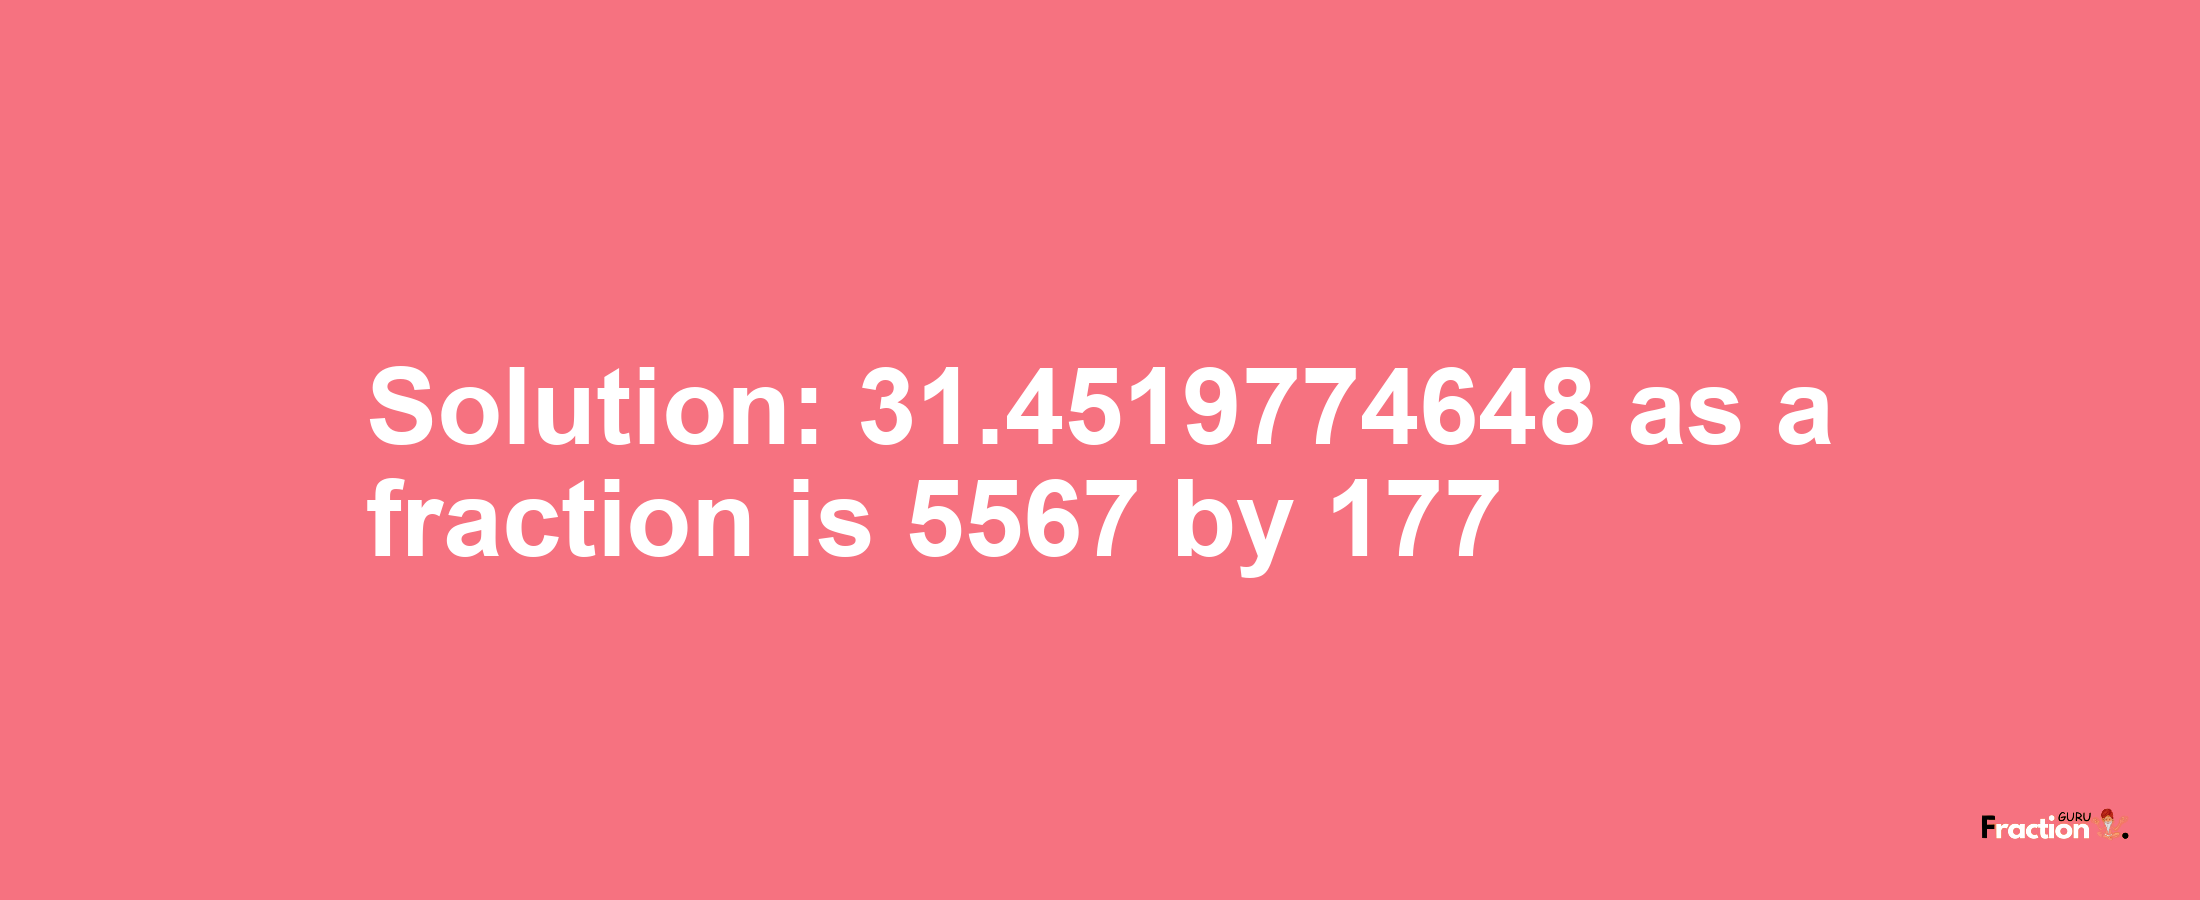 Solution:31.4519774648 as a fraction is 5567/177